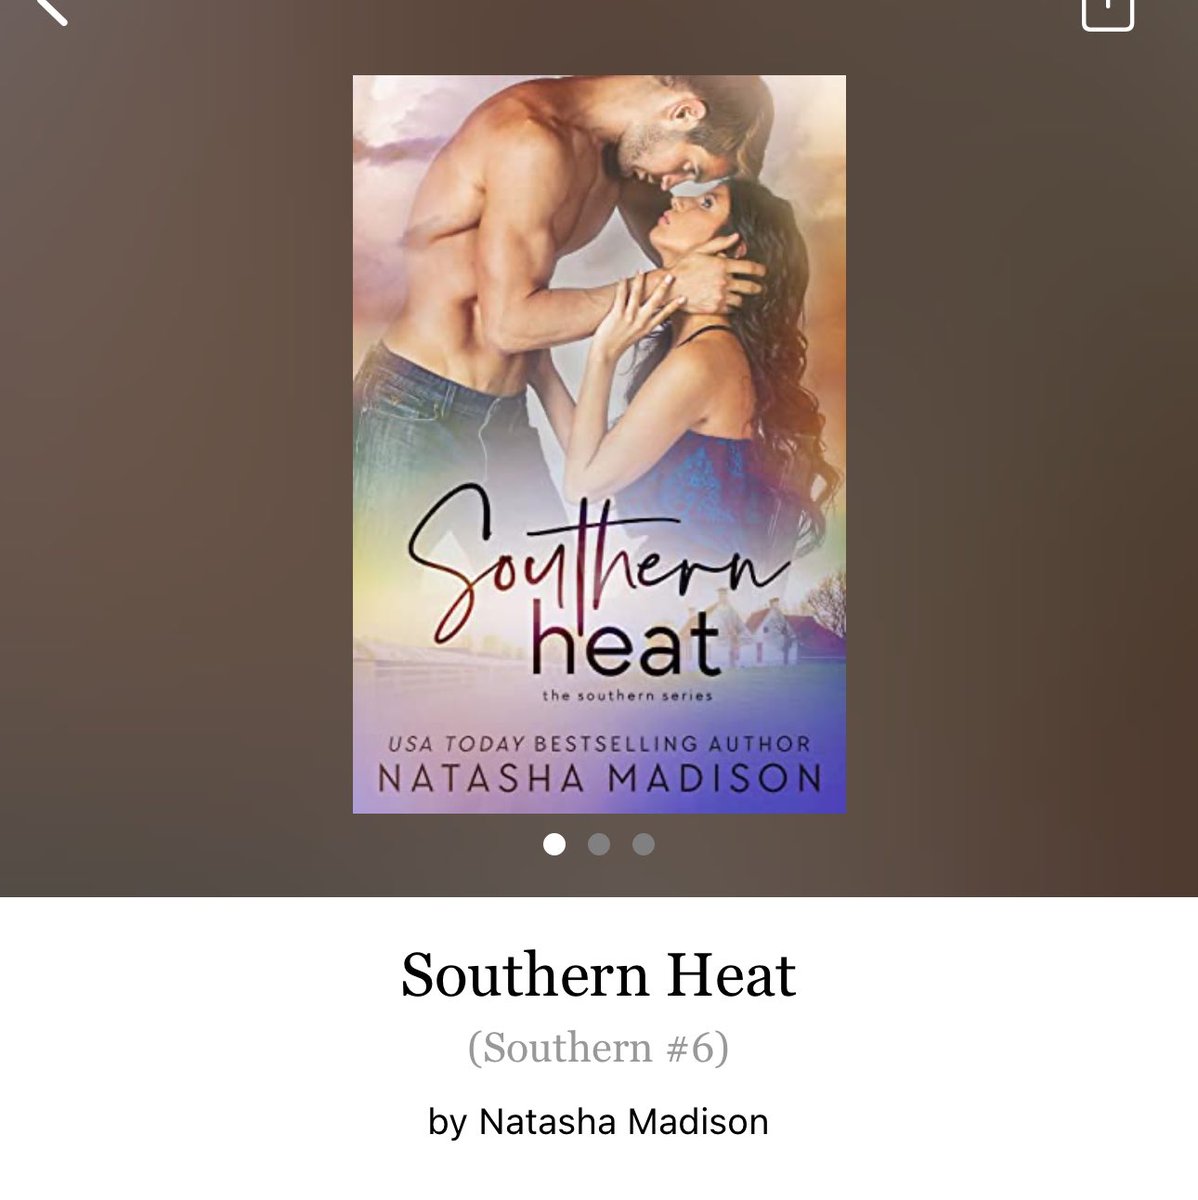 Southern Heat by Natasha Madison 

#SouthernHeat by #NatashaMadison #6312 #33chapters #227pages #461of400 #Audiobook #99for25 #Book6of8 #SouthernWeddingSeries #WillowAndQuinn #7houraudiobook #april2024 #clearingoffreadingshelves #whatsnext #readitquick